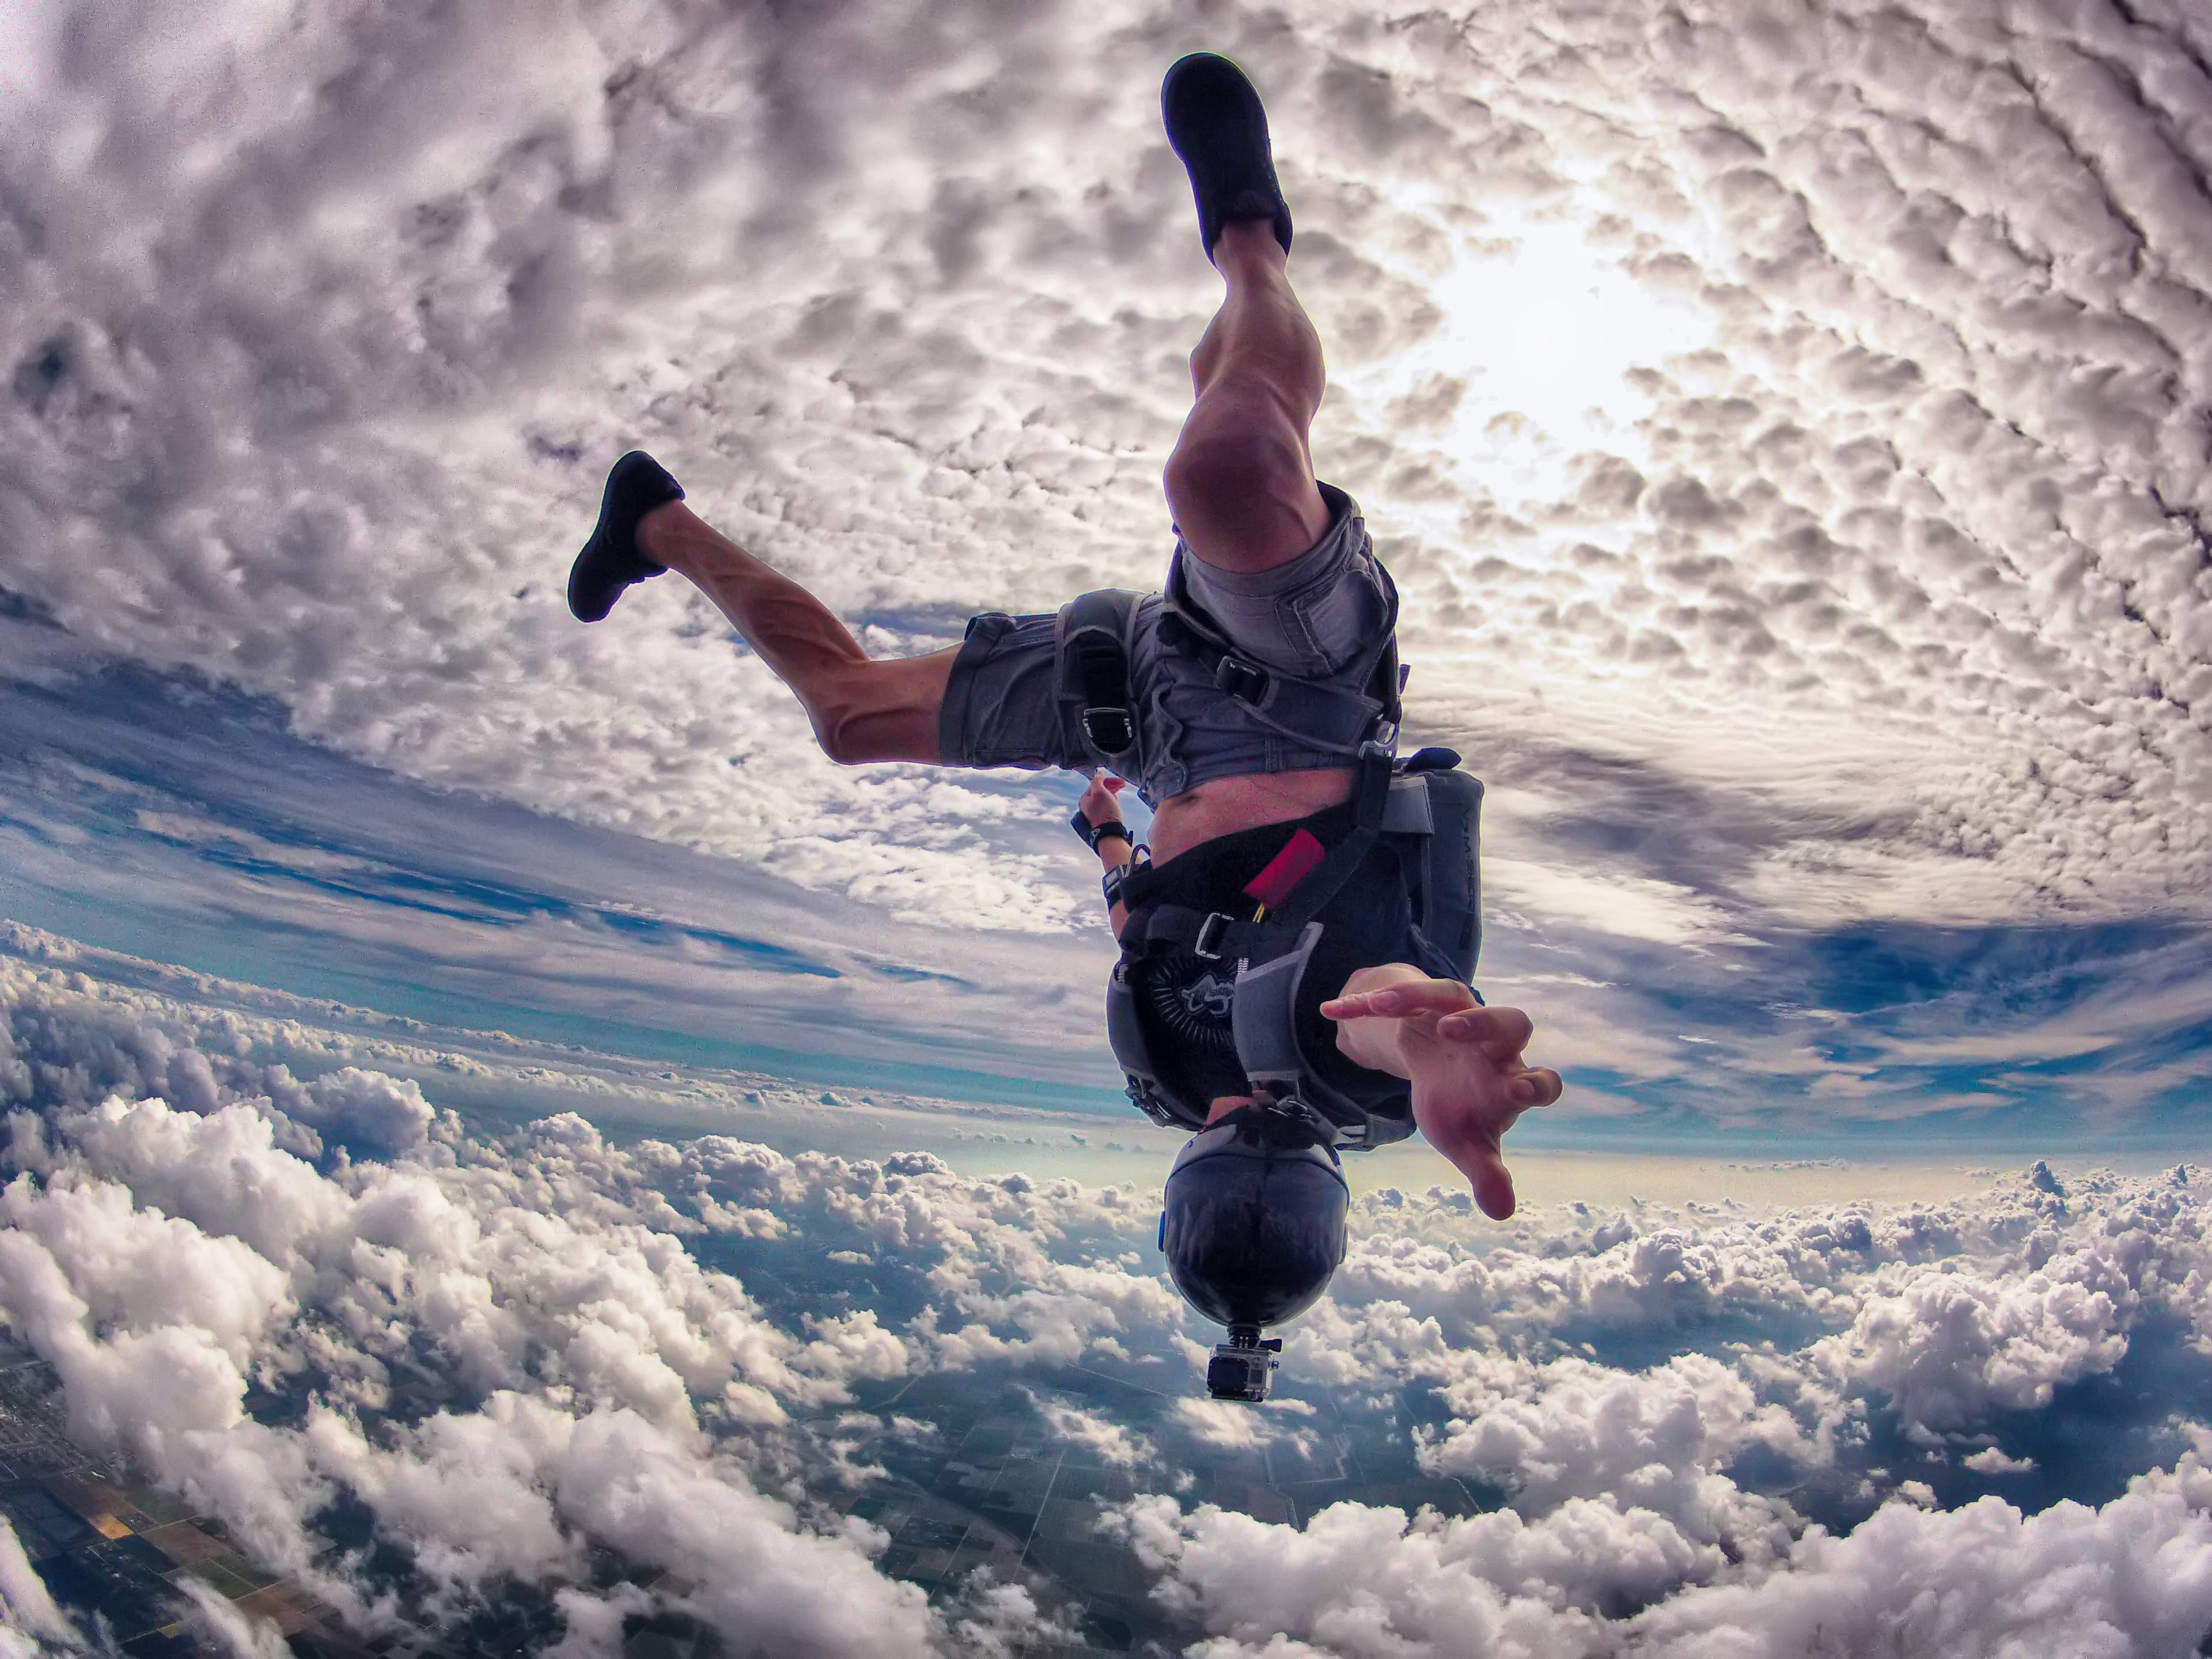 Skydiving Backgrounds, Pictures, Images